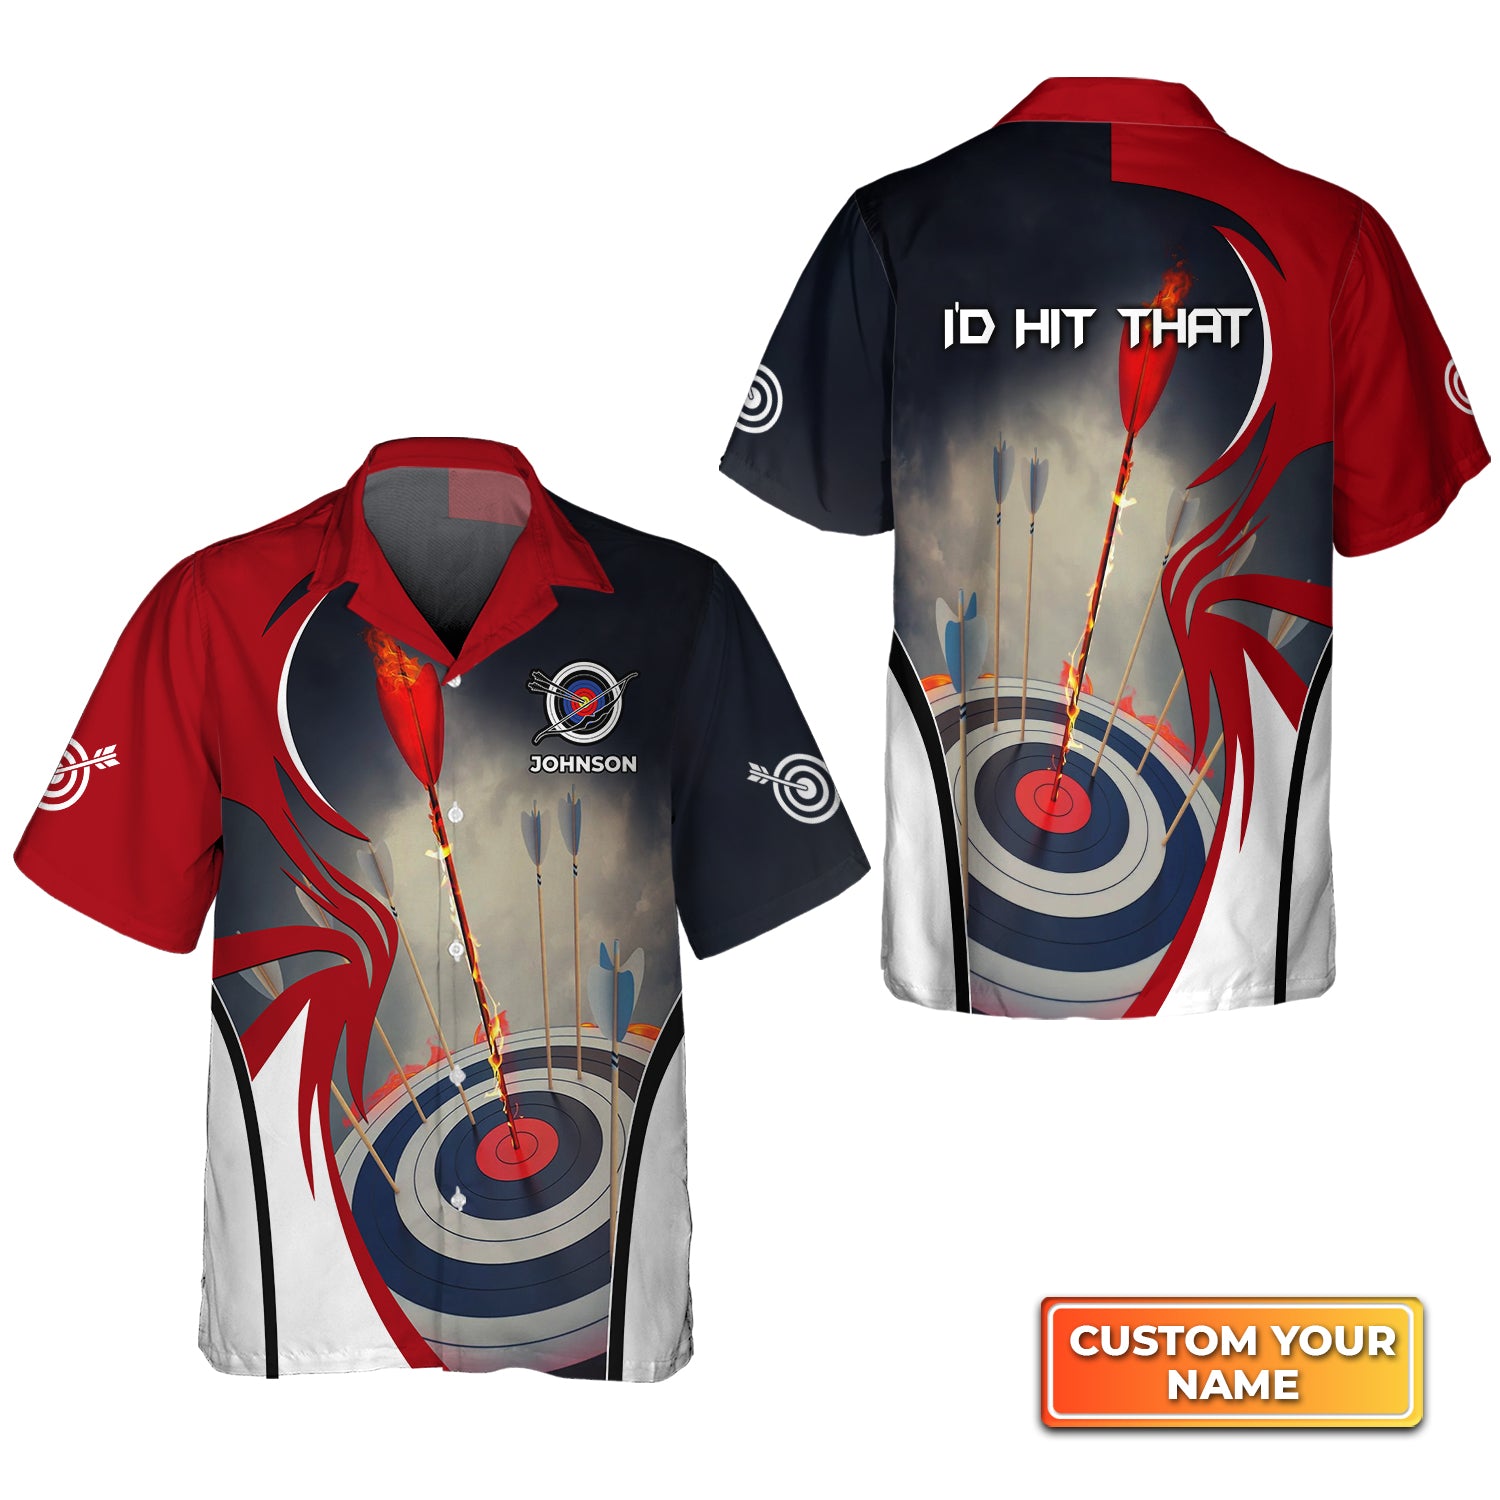 I'd Hit That Archery Target On Fire Personalized Name 3D Hawaiian Shirt QB95 Gift For Archer